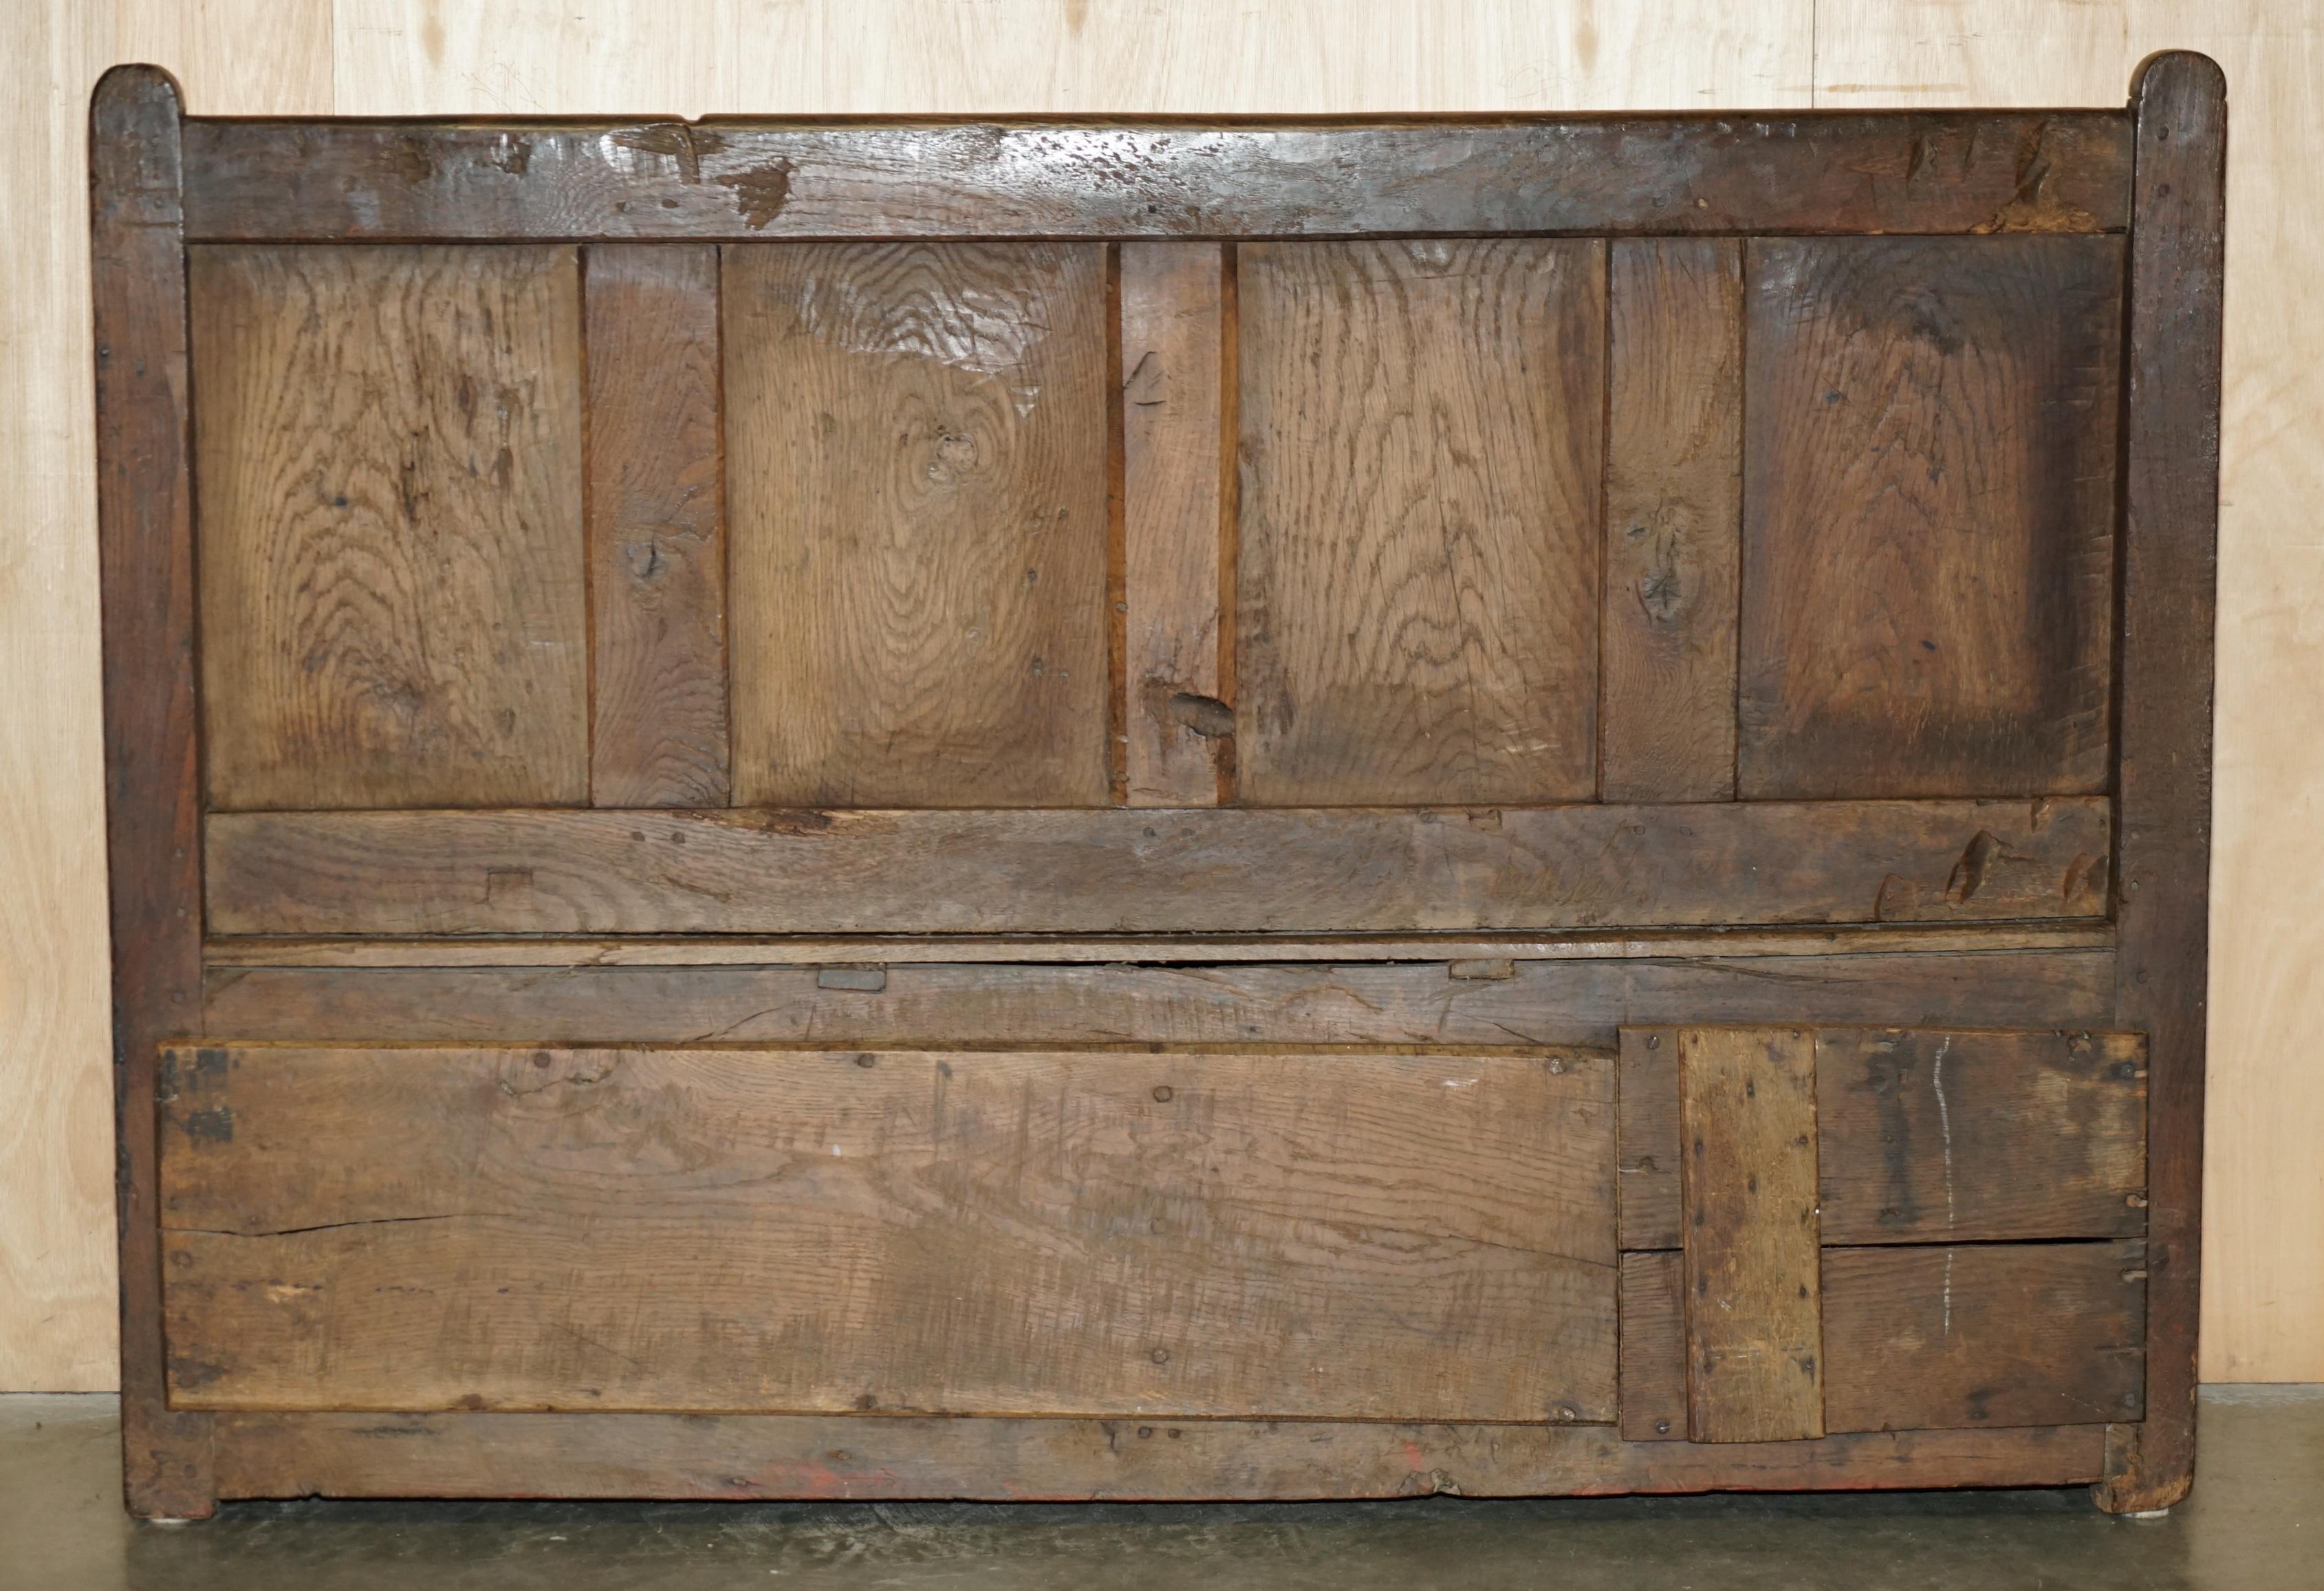 STUNNiNG 17TH CENTURY ANGLESEY WALES SETTLE BENCH LOVELY HALLWAY TAVERN SEATING im Angebot 9